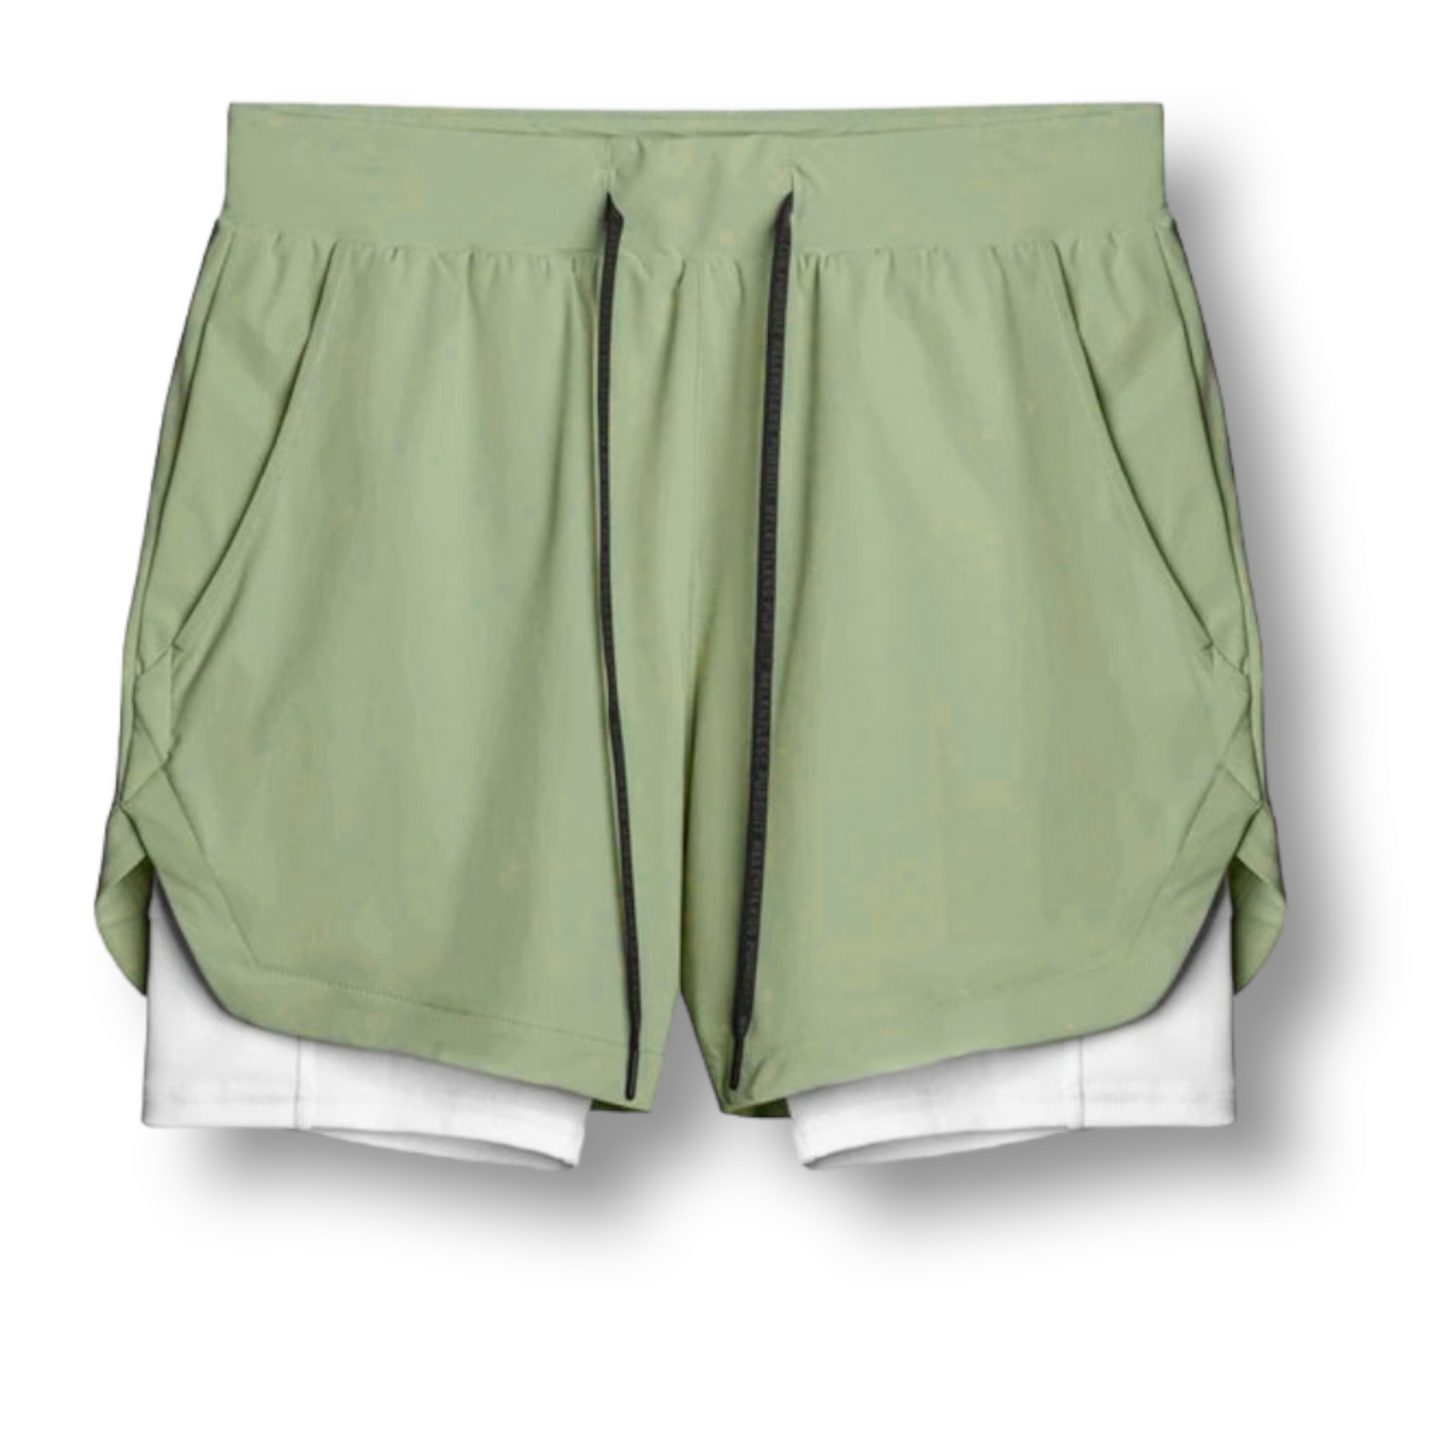 a pair of green mint elijah gym shorts with liner underneath on a white background